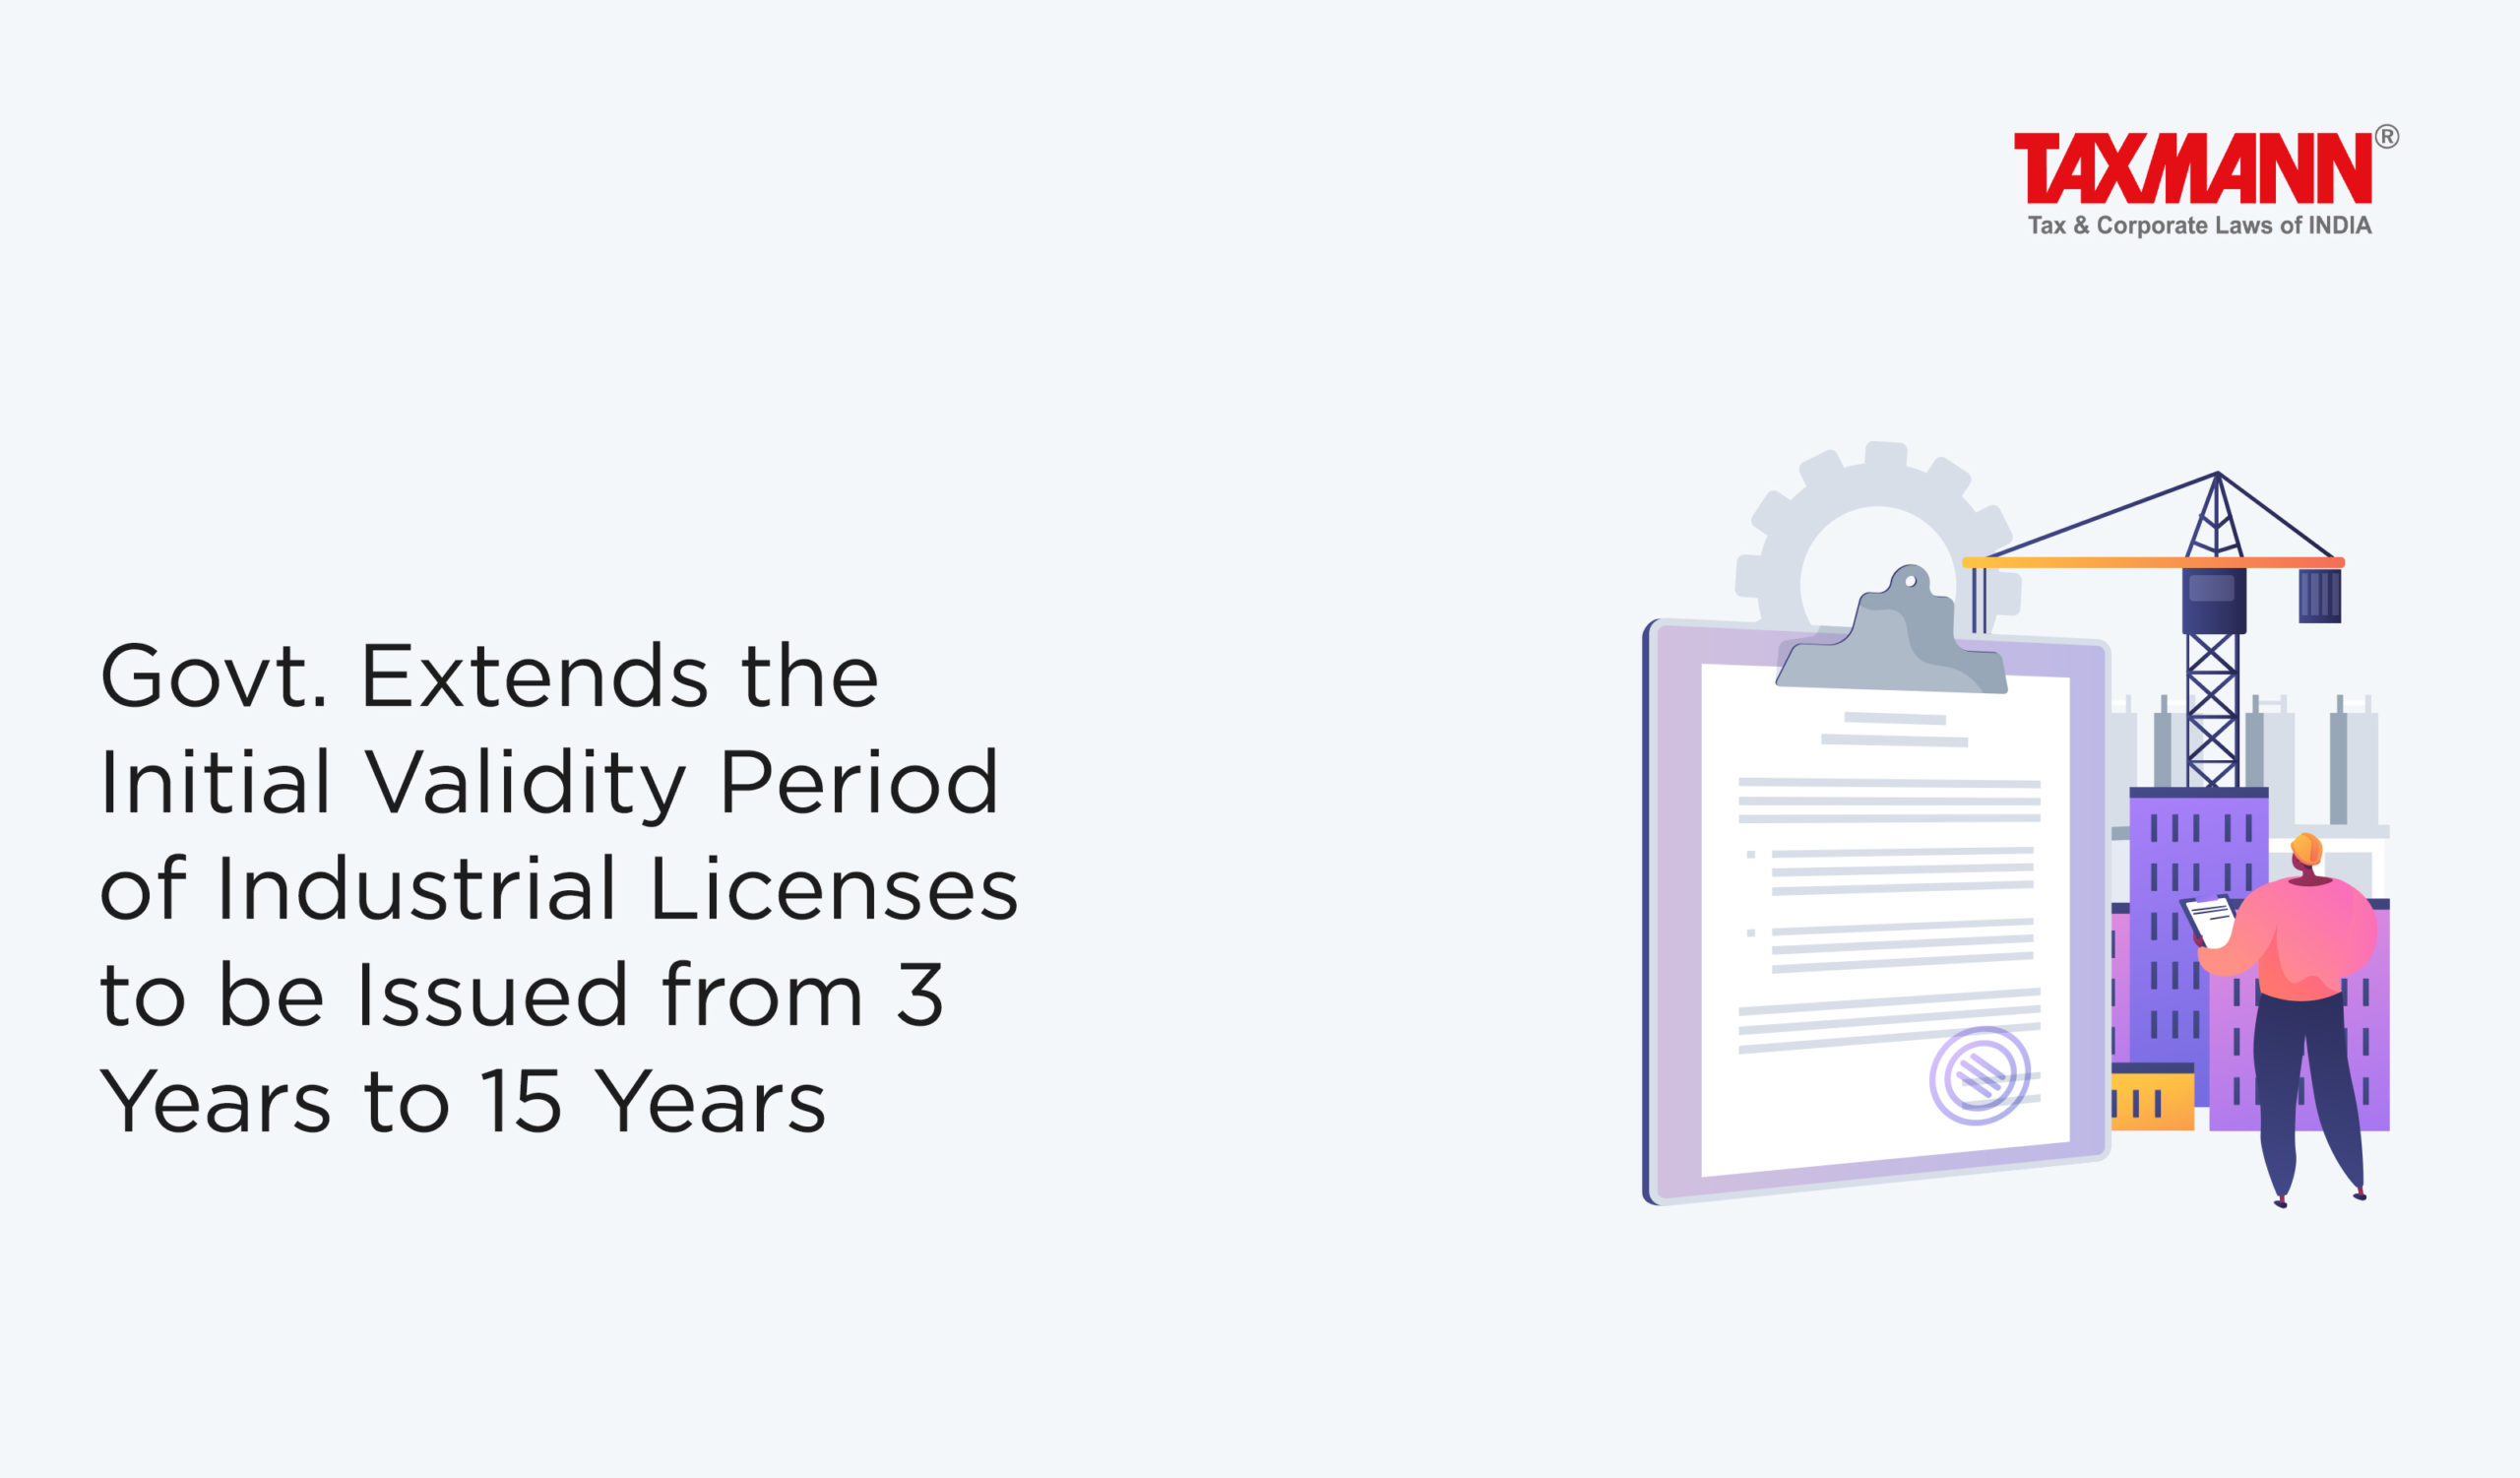 Initial Validity Period of Industrial Licenses under IRDA